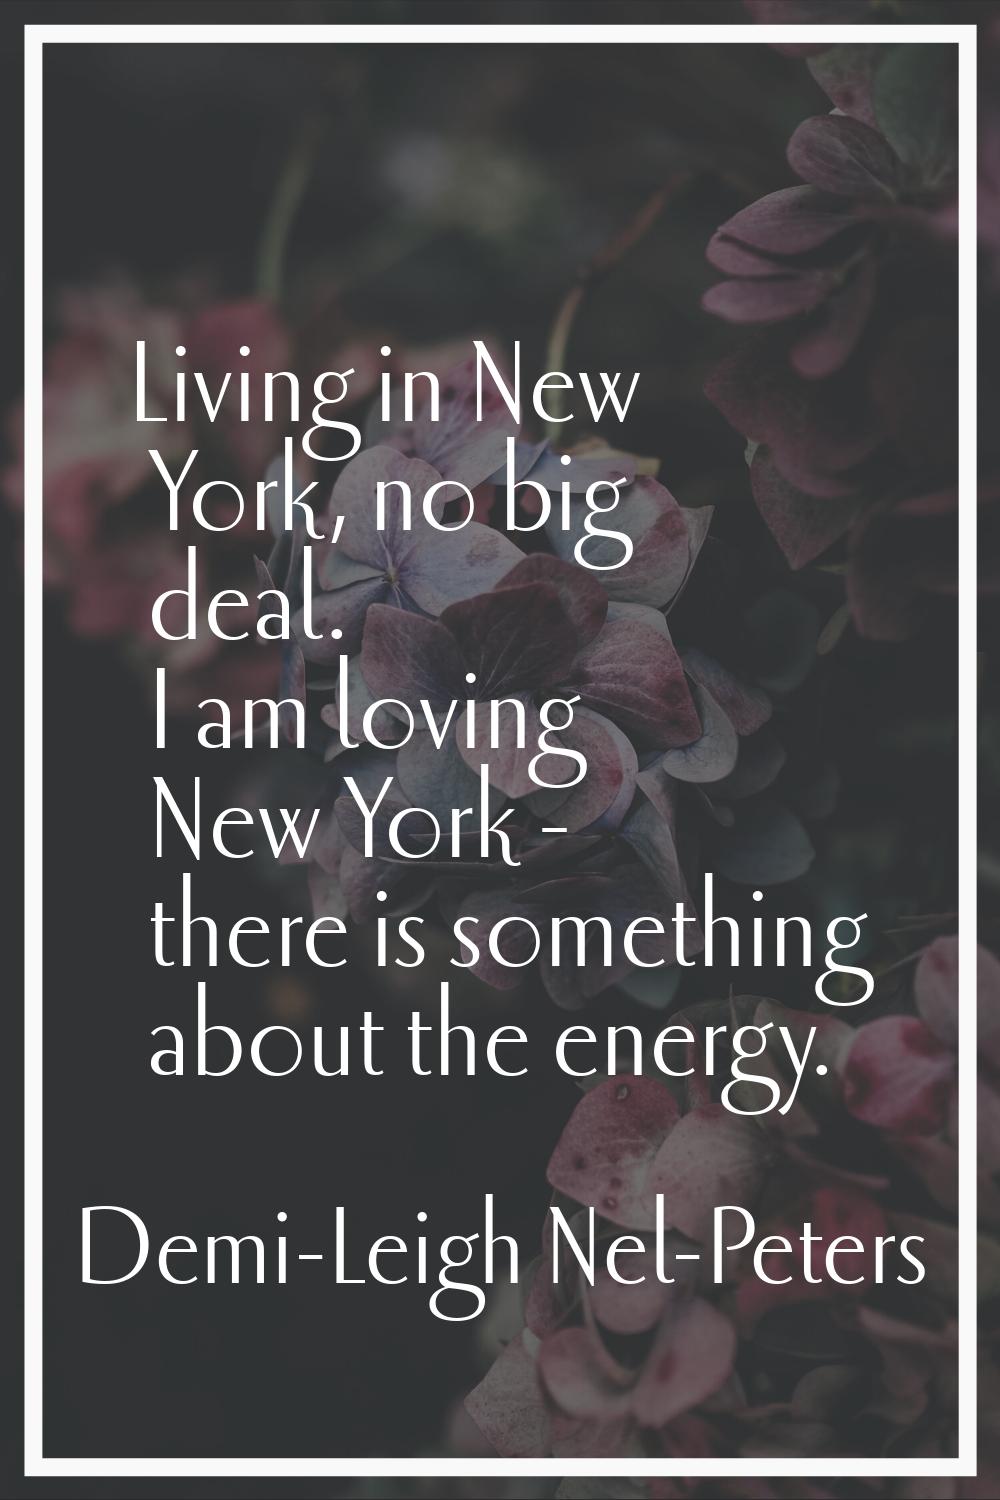 Living in New York, no big deal. I am loving New York - there is something about the energy.